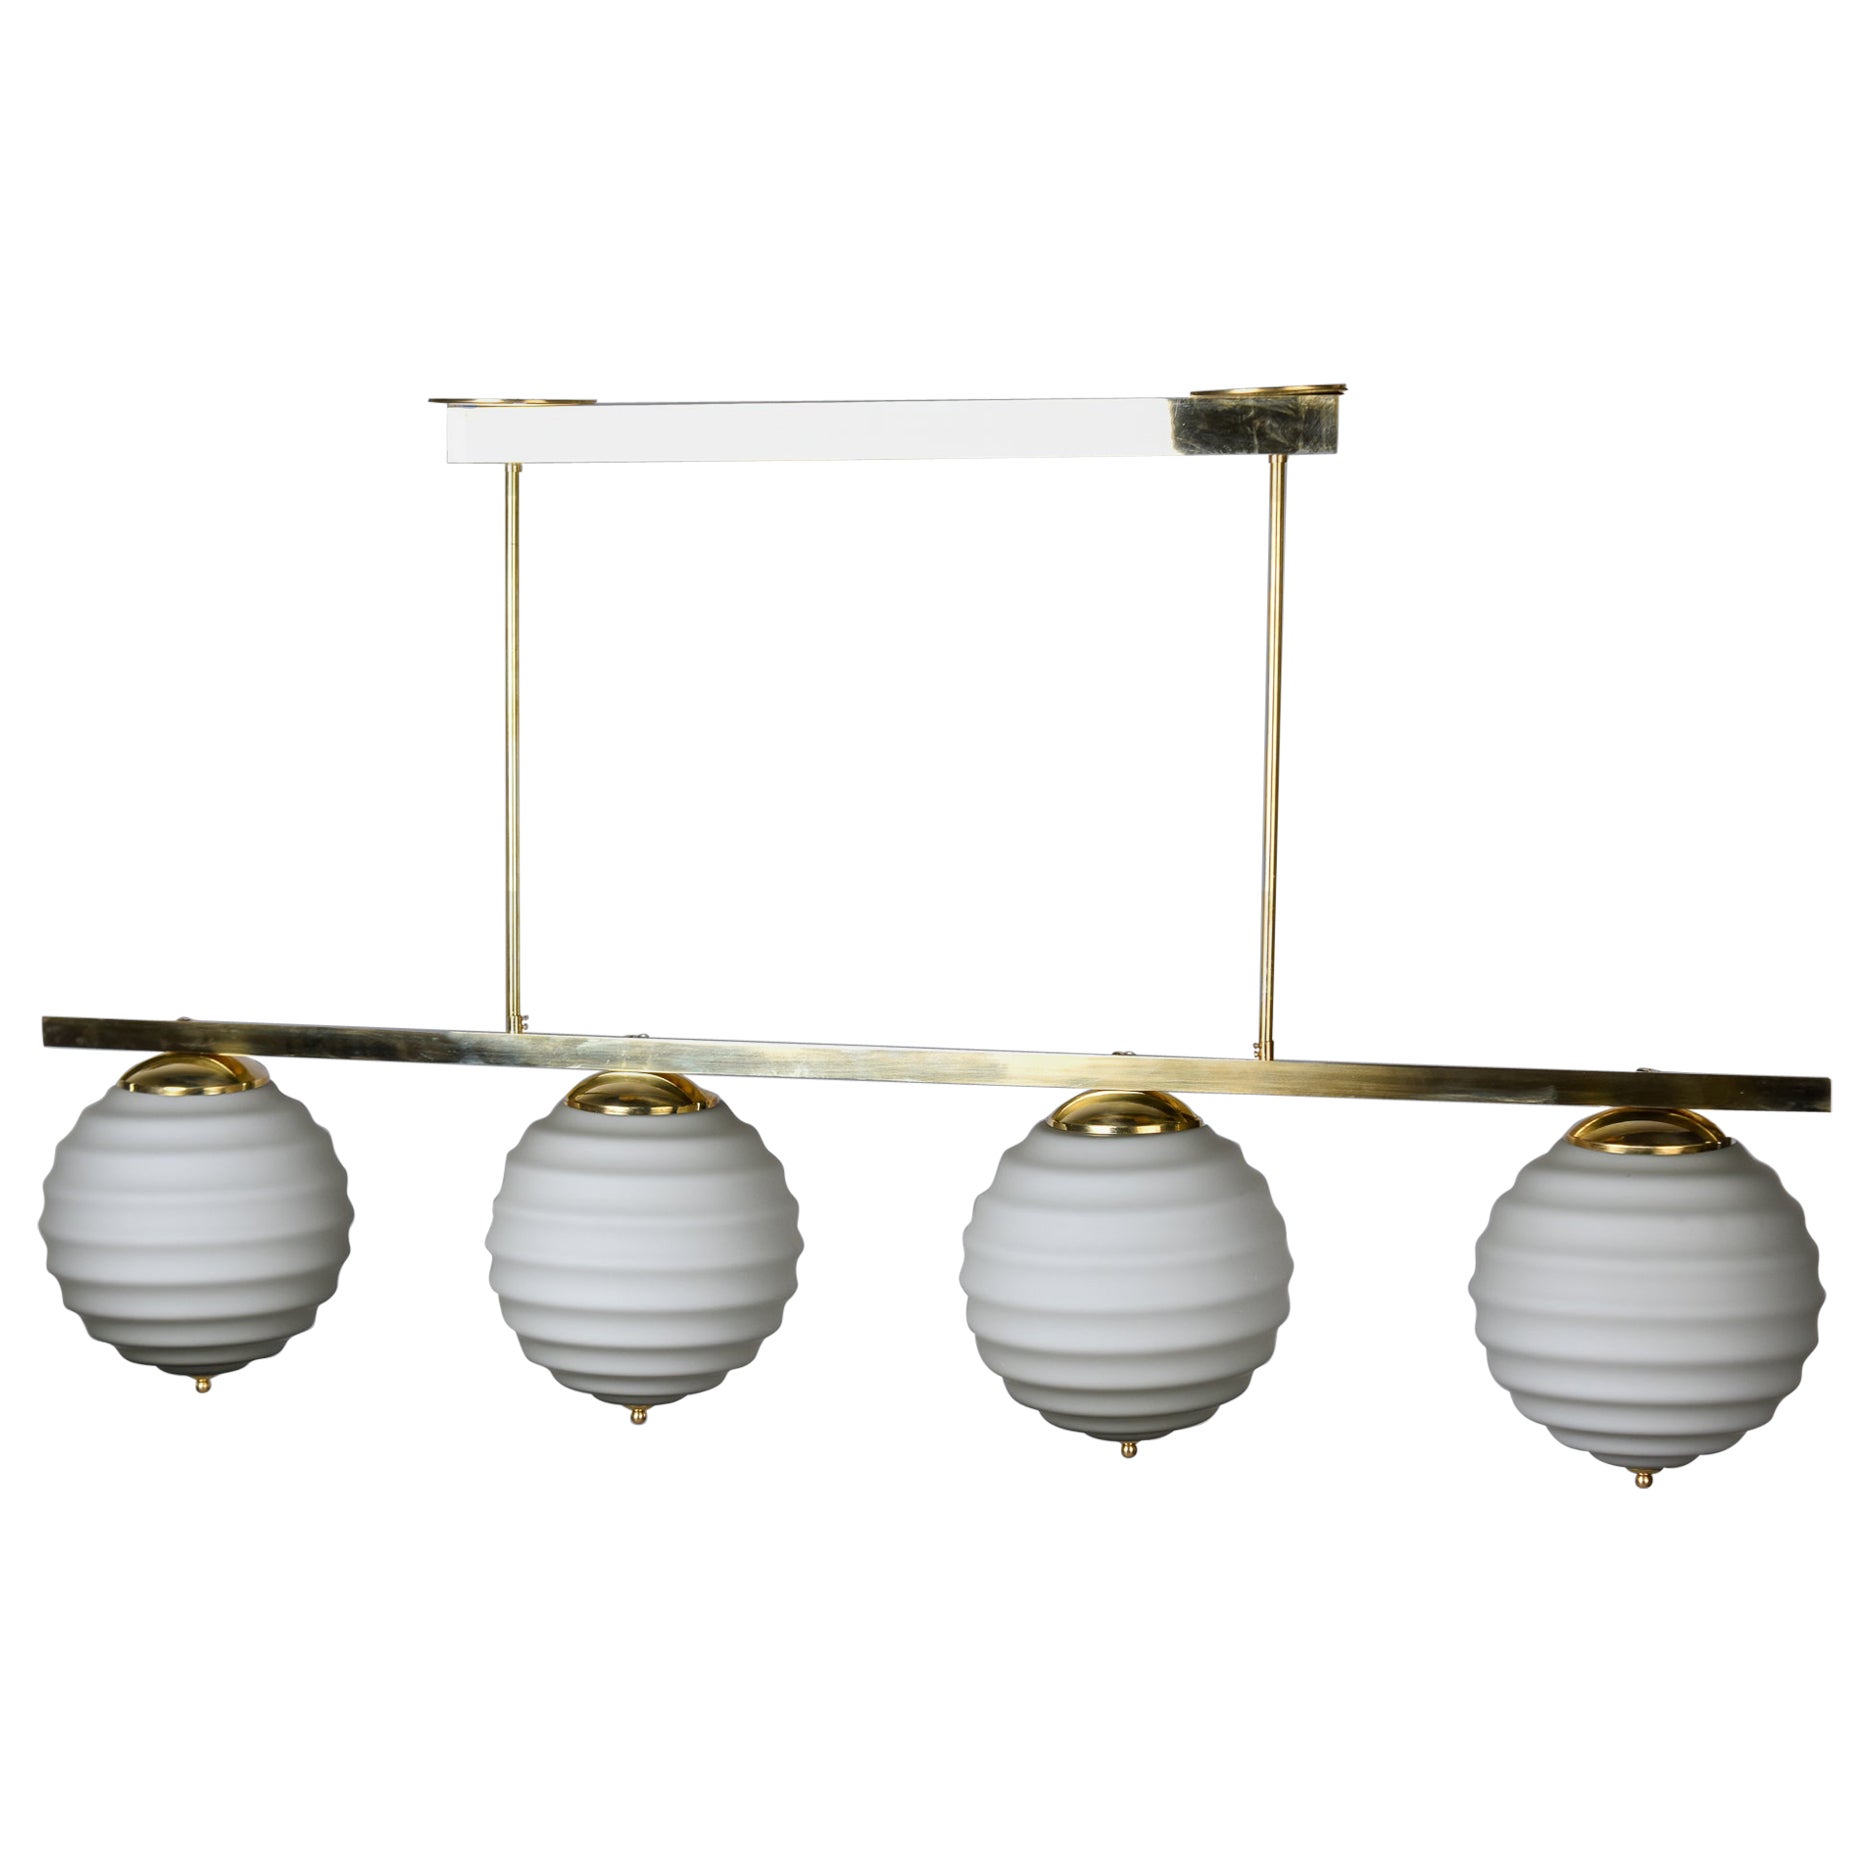 New Italian Fixture with Four Pale Taupe Globes on Horizontal Brass Bar For Sale